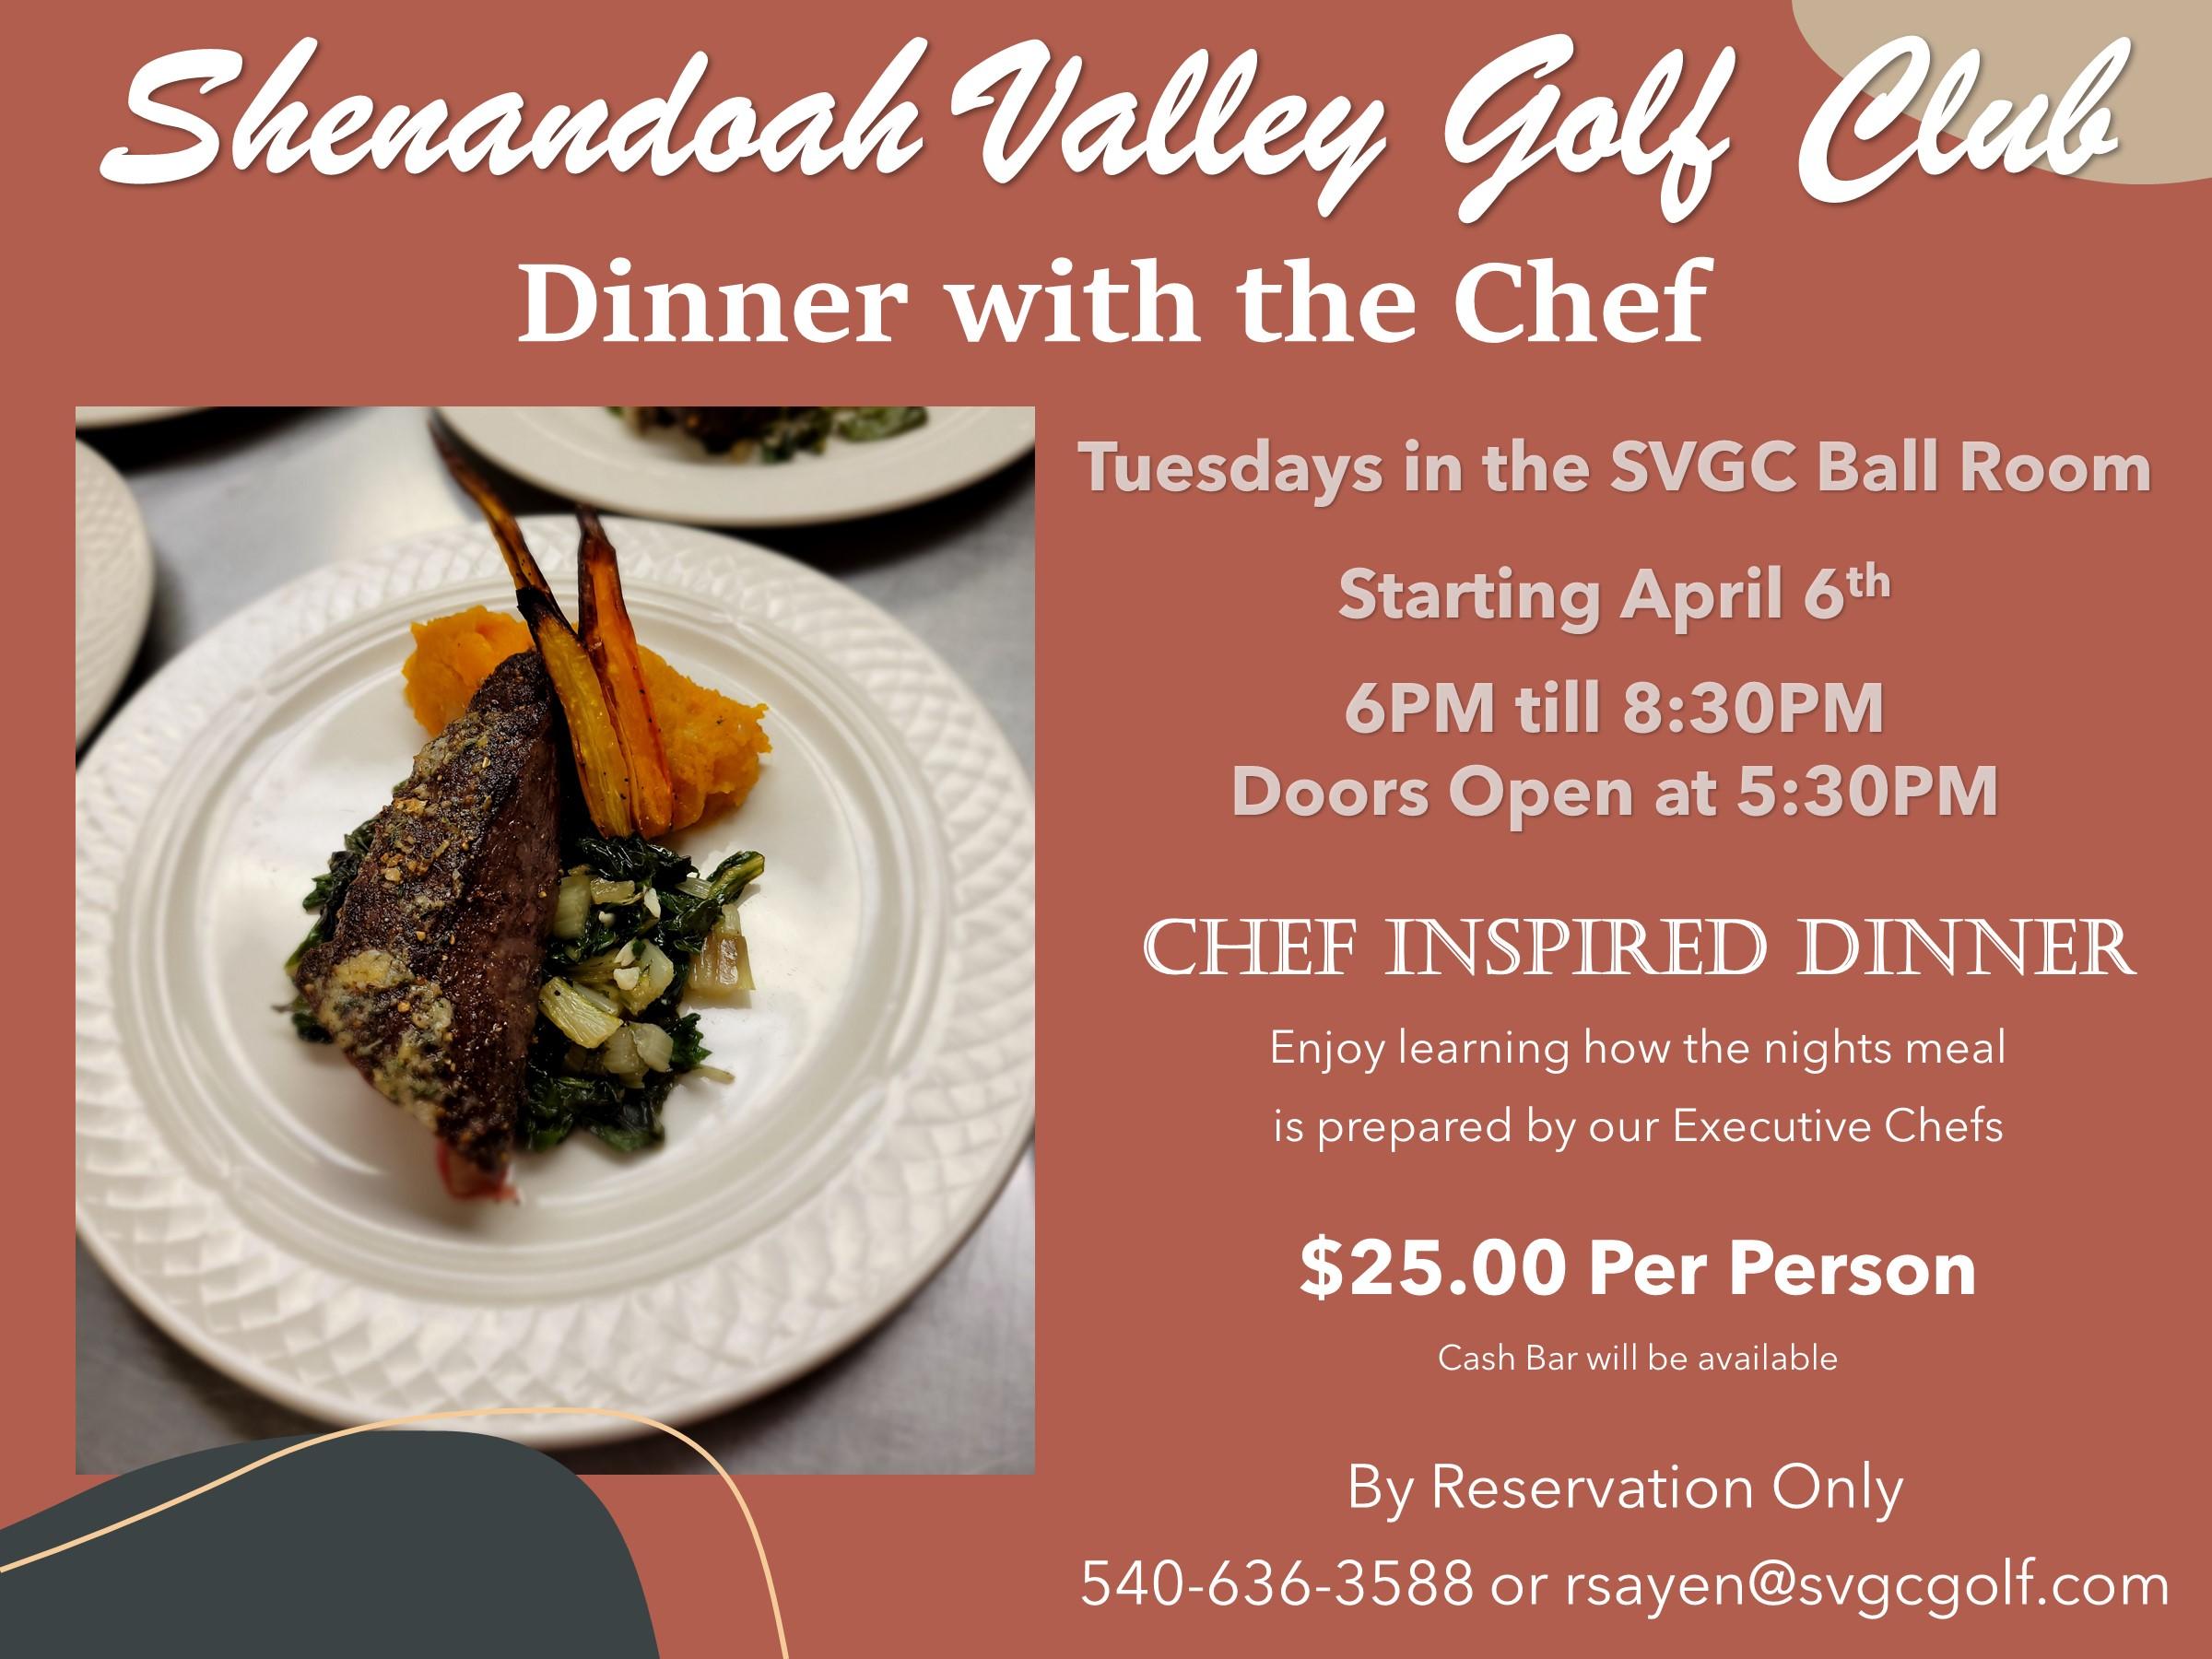 SHENANDOAH VALLEY GOLF CLUB'S DINNER WITH THE CHEF